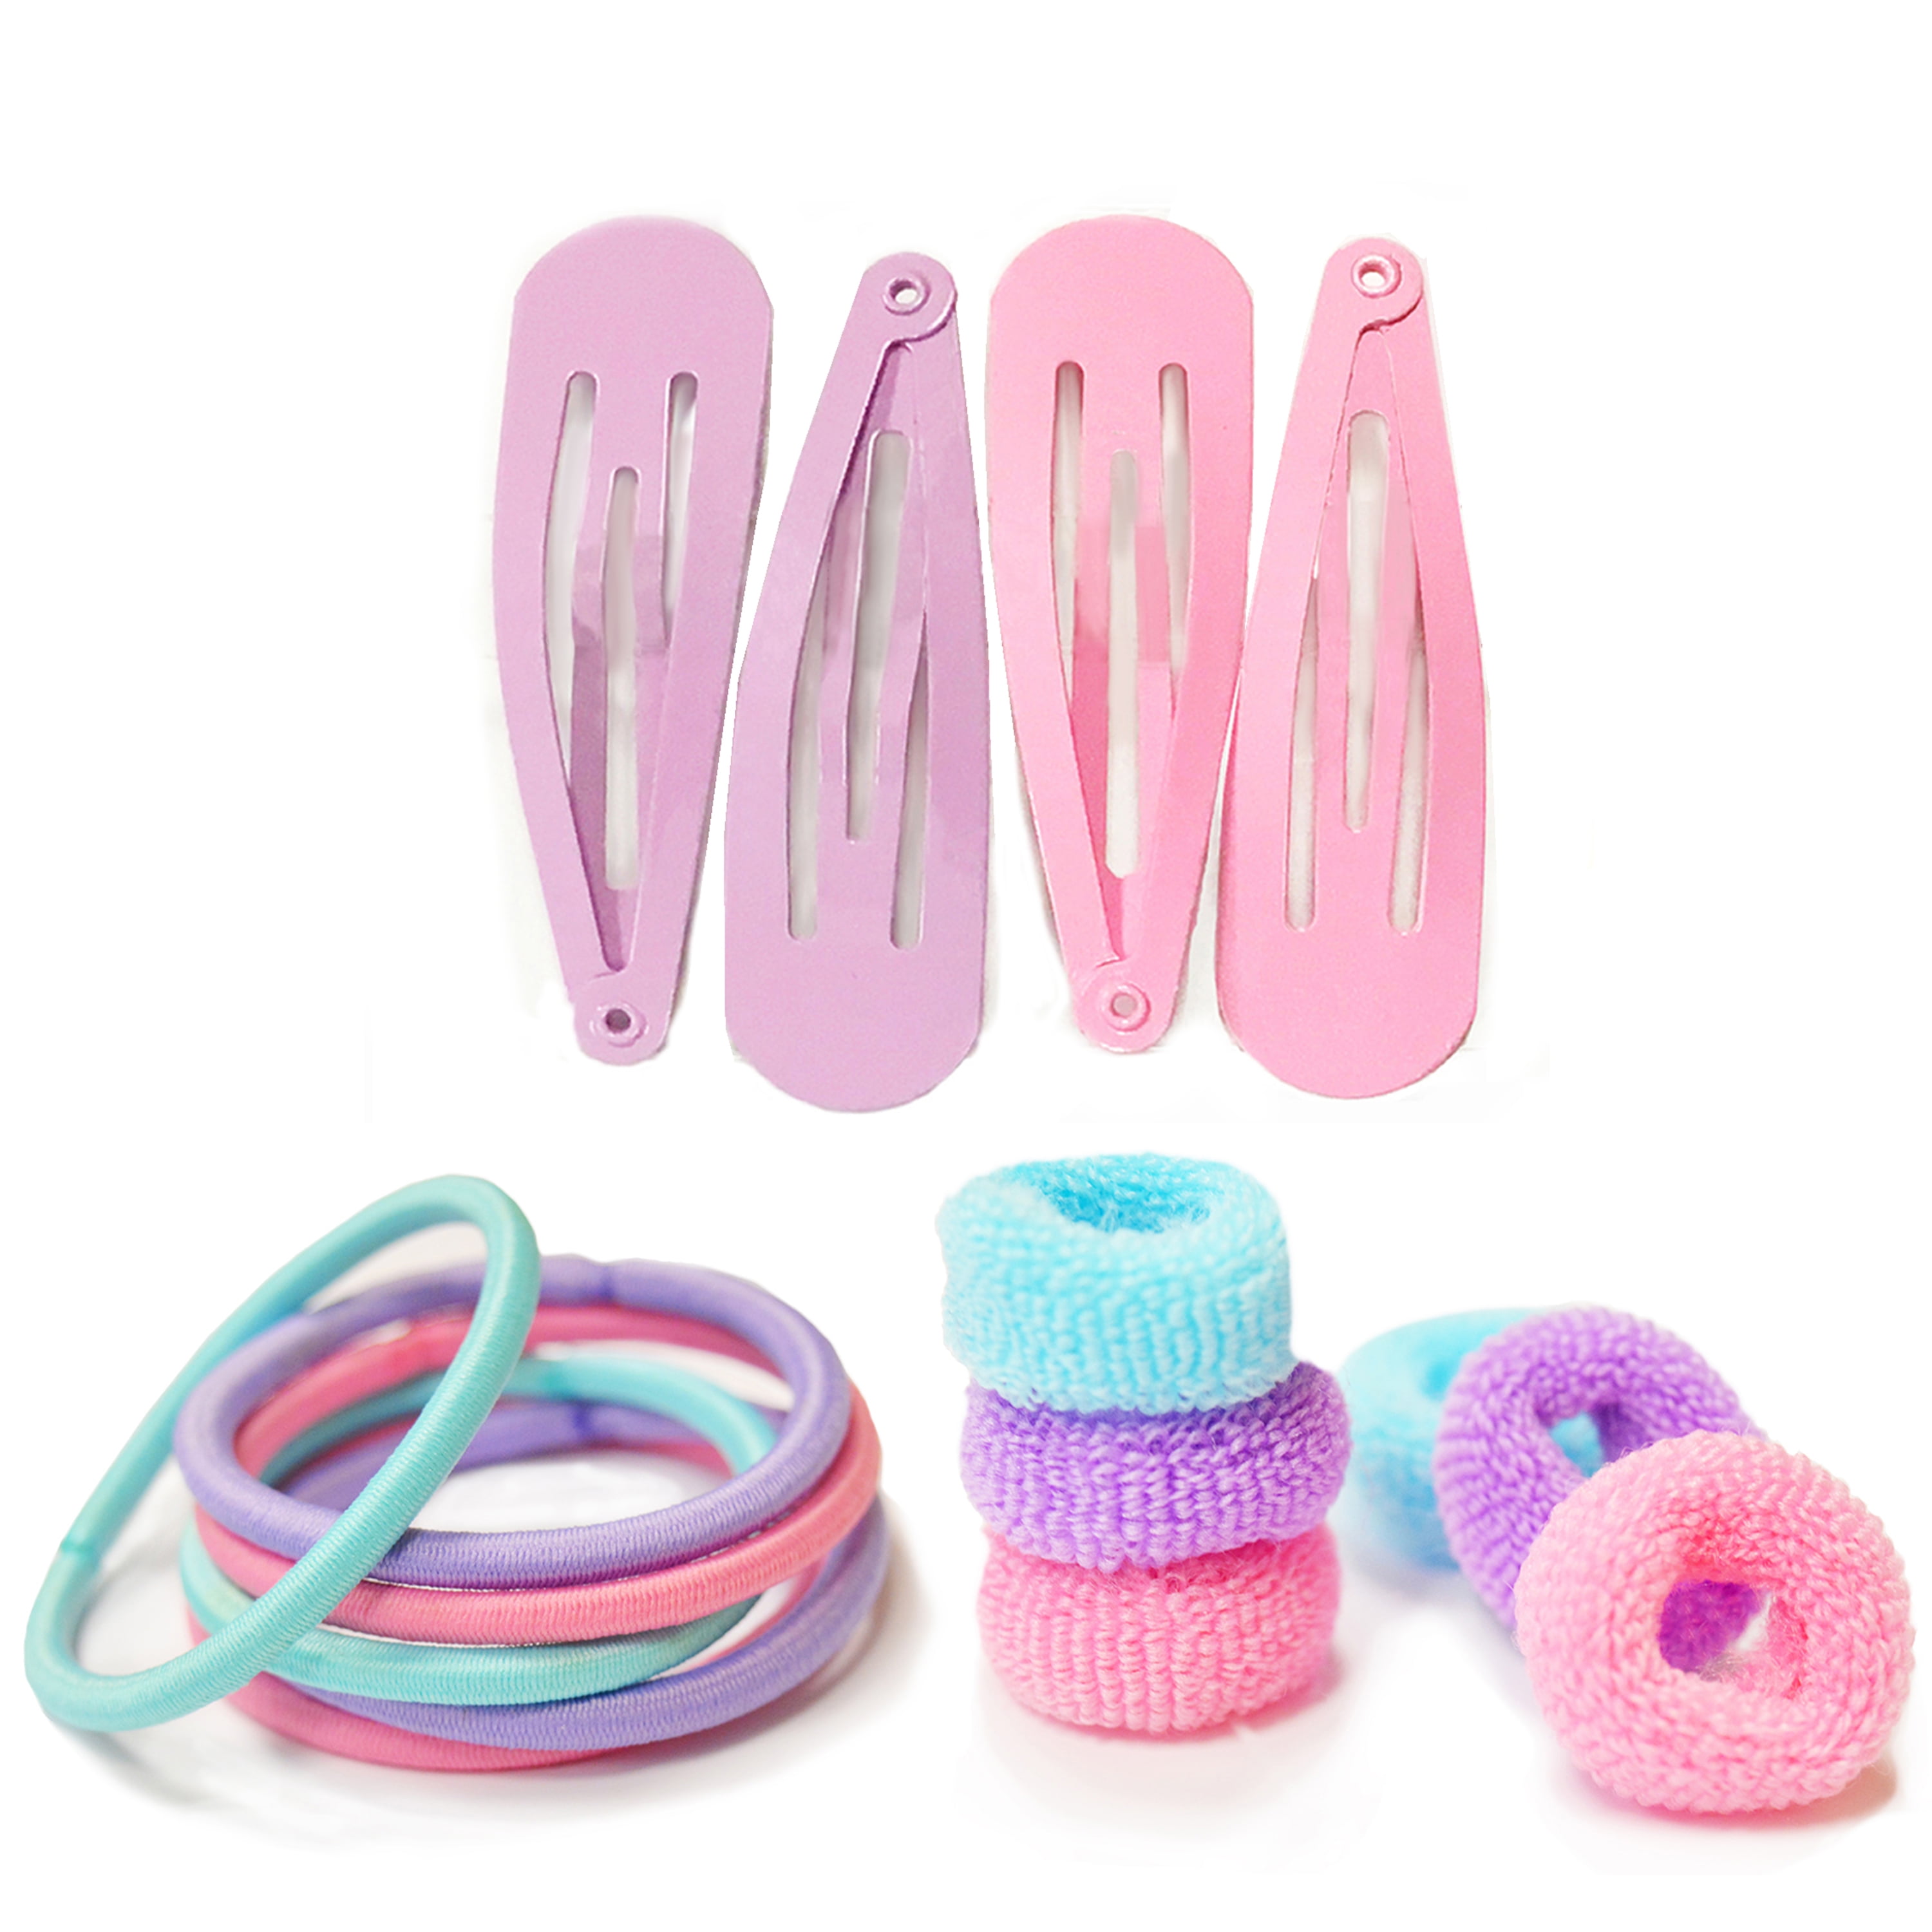 50pcs Stretchy Spiral Hair Bands Plastic Tangle Free Ponytail Elastic Bobbles